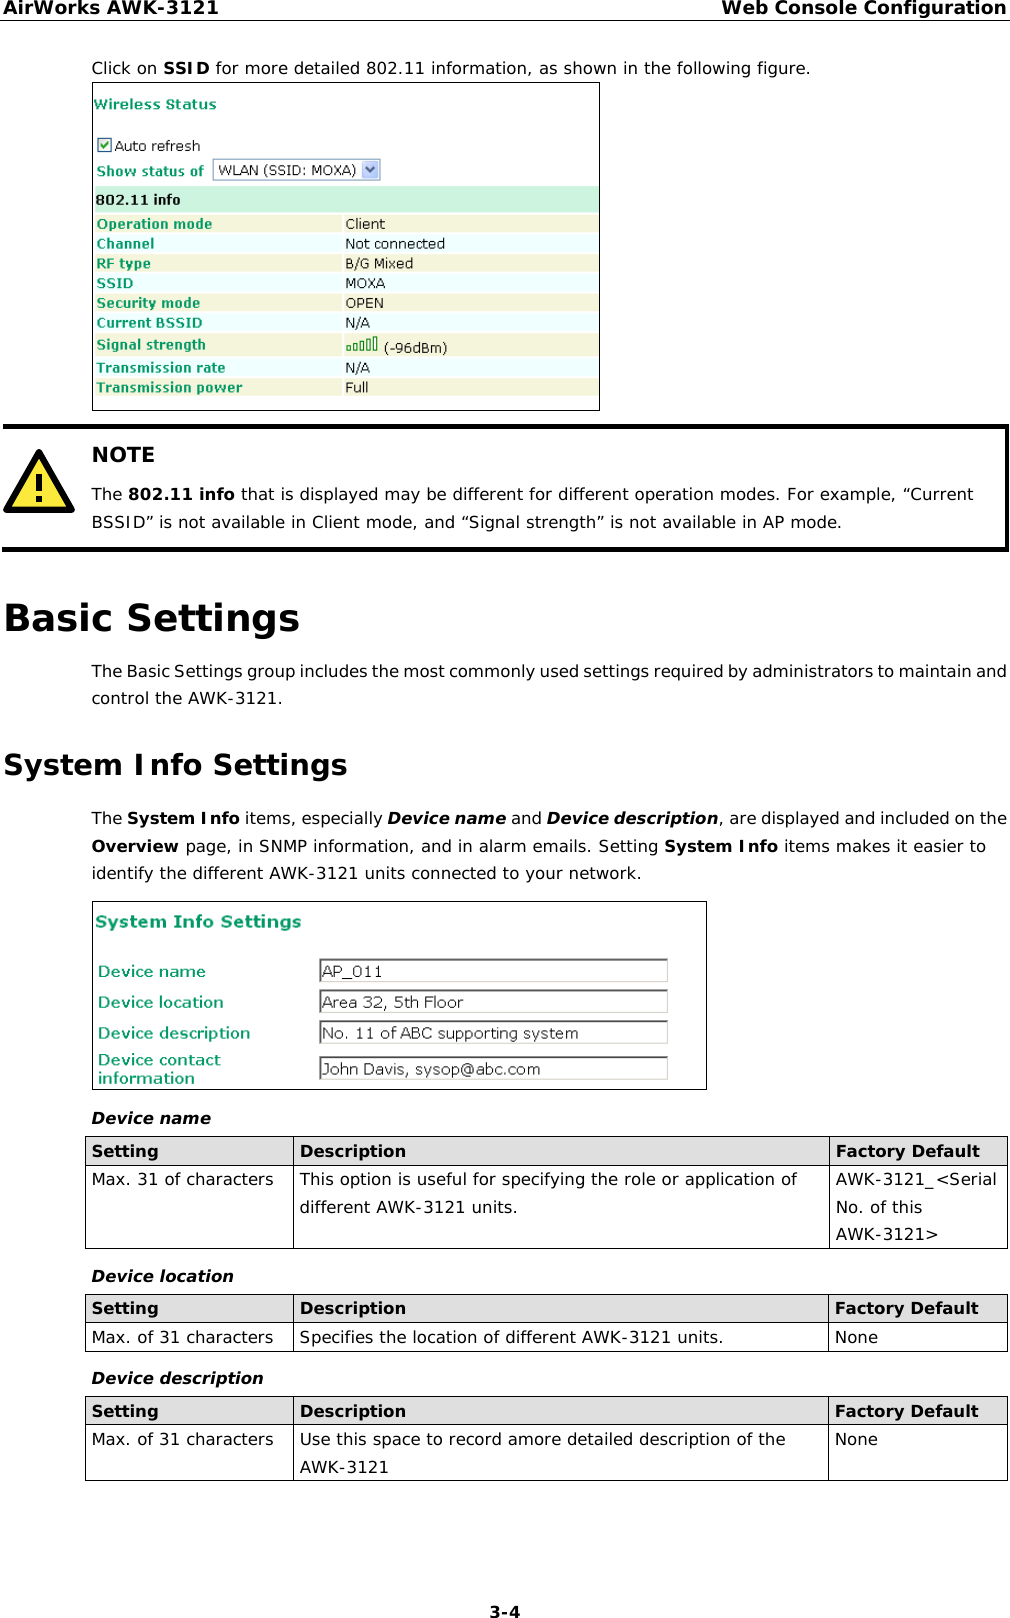 AirWorks AWK-3121  Web Console Configuration  3-4Click on SSID for more detailed 802.11 information, as shown in the following figure.   NOTE The 802.11 info that is displayed may be different for different operation modes. For example, “Current BSSID” is not available in Client mode, and “Signal strength” is not available in AP mode.  Basic Settings The Basic Settings group includes the most commonly used settings required by administrators to maintain and control the AWK-3121. System Info Settings The System Info items, especially Device name and Device description, are displayed and included on the Overview page, in SNMP information, and in alarm emails. Setting System Info items makes it easier to identify the different AWK-3121 units connected to your network.  Device name Setting  Description  Factory Default Max. 31 of characters  This option is useful for specifying the role or application of different AWK-3121 units.  AWK-3121_&lt;Serial No. of this AWK-3121&gt; Device location Setting  Description  Factory Default Max. of 31 characters  Specifies the location of different AWK-3121 units.  None Device description Setting  Description  Factory Default Max. of 31 characters  Use this space to record amore detailed description of the AWK-3121  None  